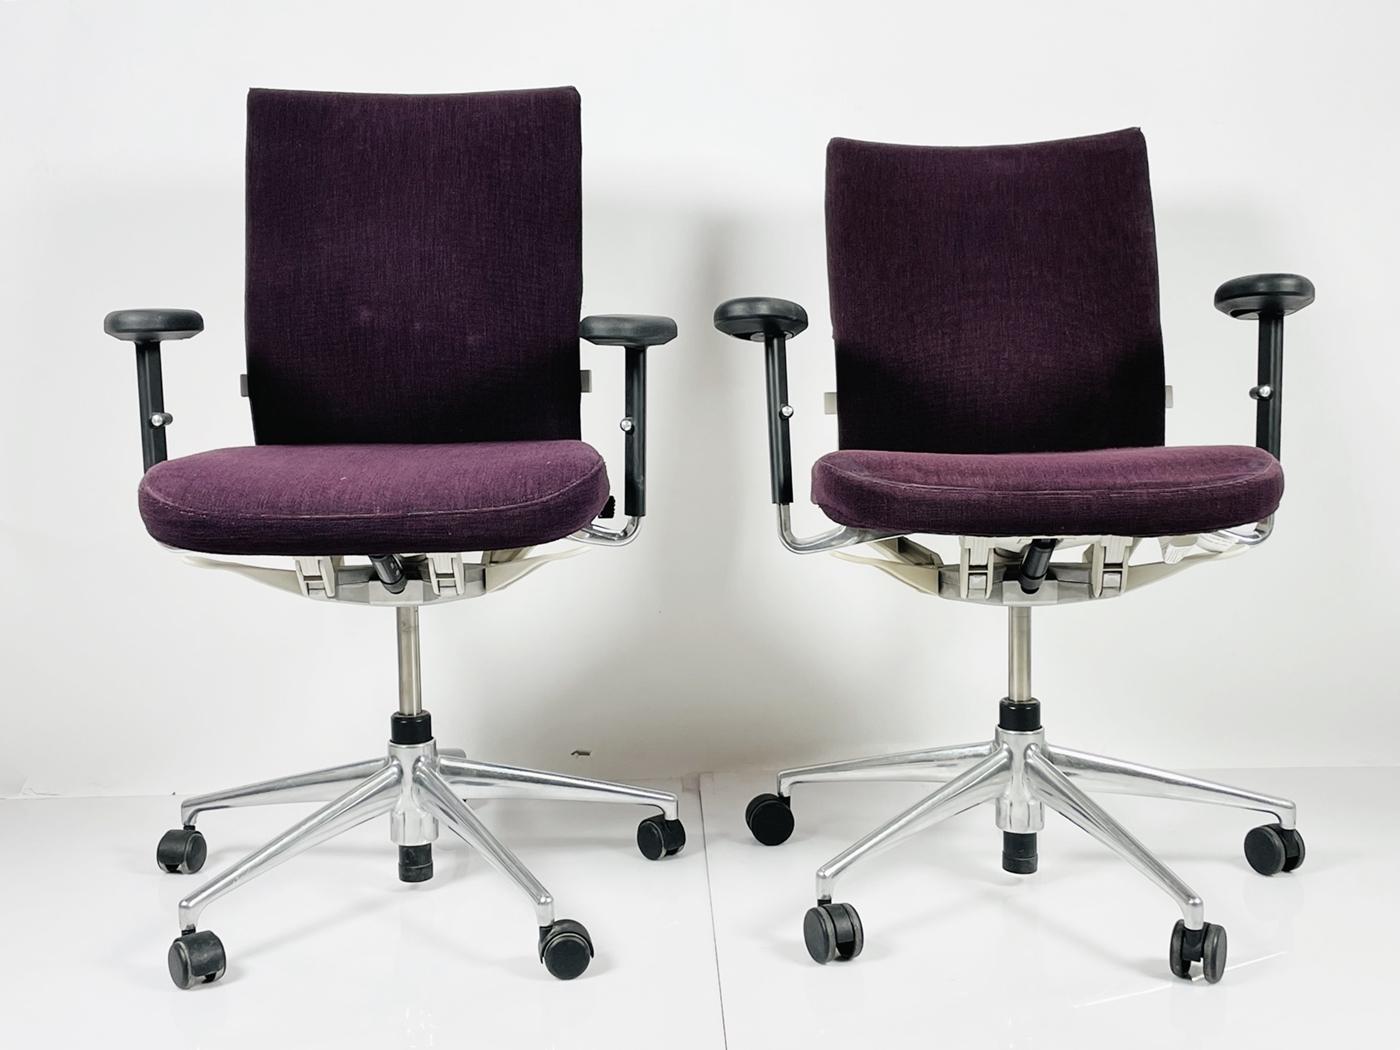 Nice pair of office/desk chairs designed by Antonio Citterio and manufactured by Vitra and part of the Axess collection.

The chairs and armrests are height adjustable, the backs tilt back and are very comfortable.

The chairs have casters on an